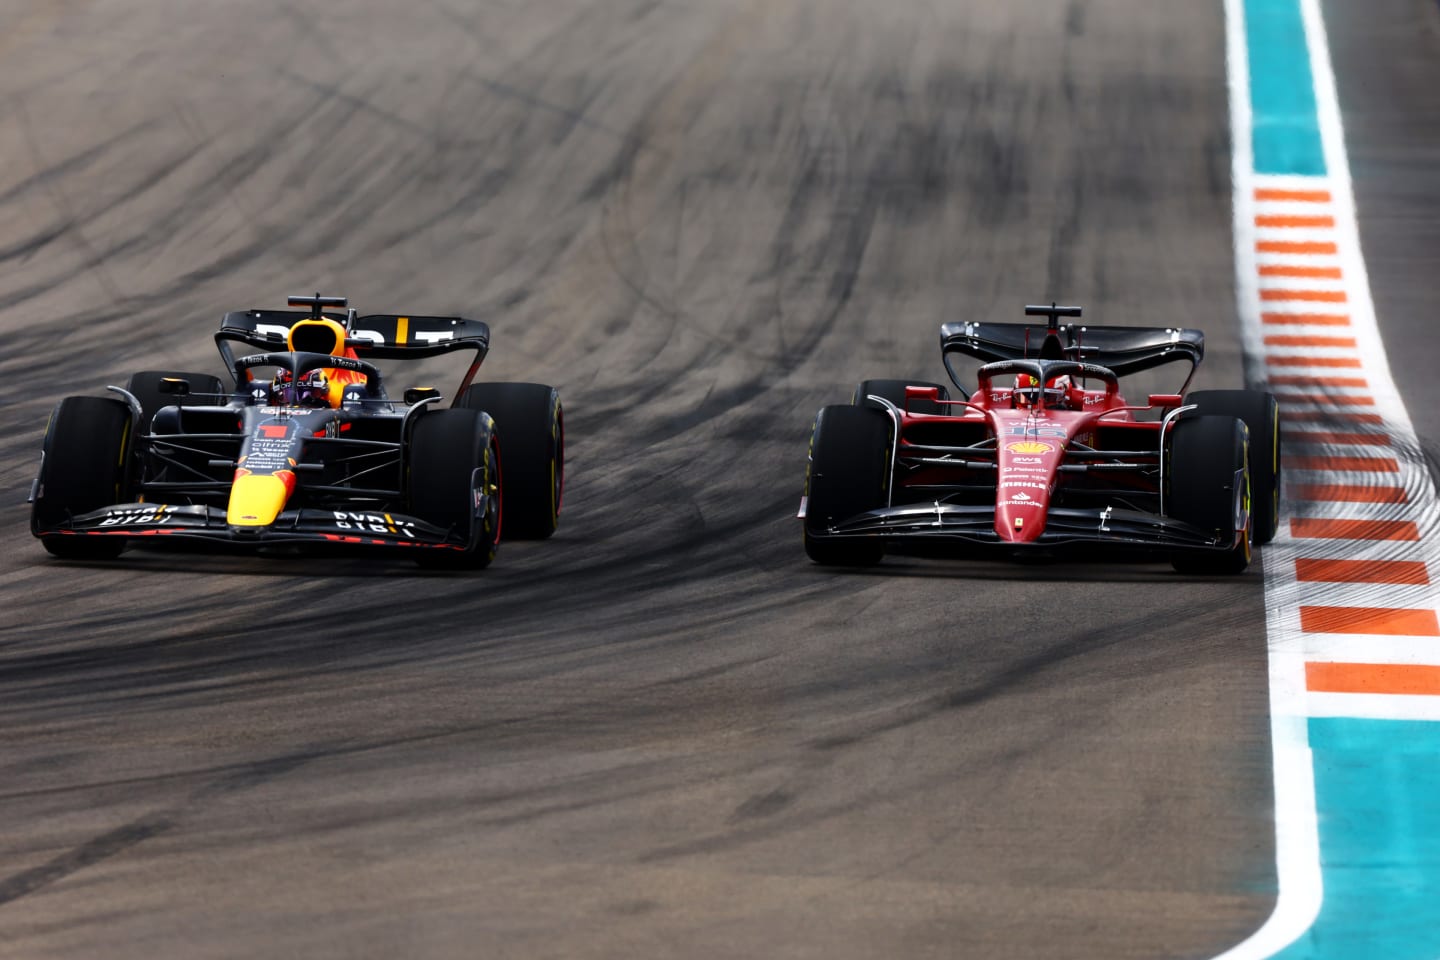 MIAMI, FLORIDA - MAY 08: Max Verstappen of the Netherlands driving the (1) Oracle Red Bull Racing RB18 and Charles Leclerc of Monaco driving (16) the Ferrari F1-75 compete for position on track during the F1 Grand Prix of Miami at the Miami International Autodrome on May 08, 2022 in Miami, Florida. (Photo by Mark Thompson/Getty Images)